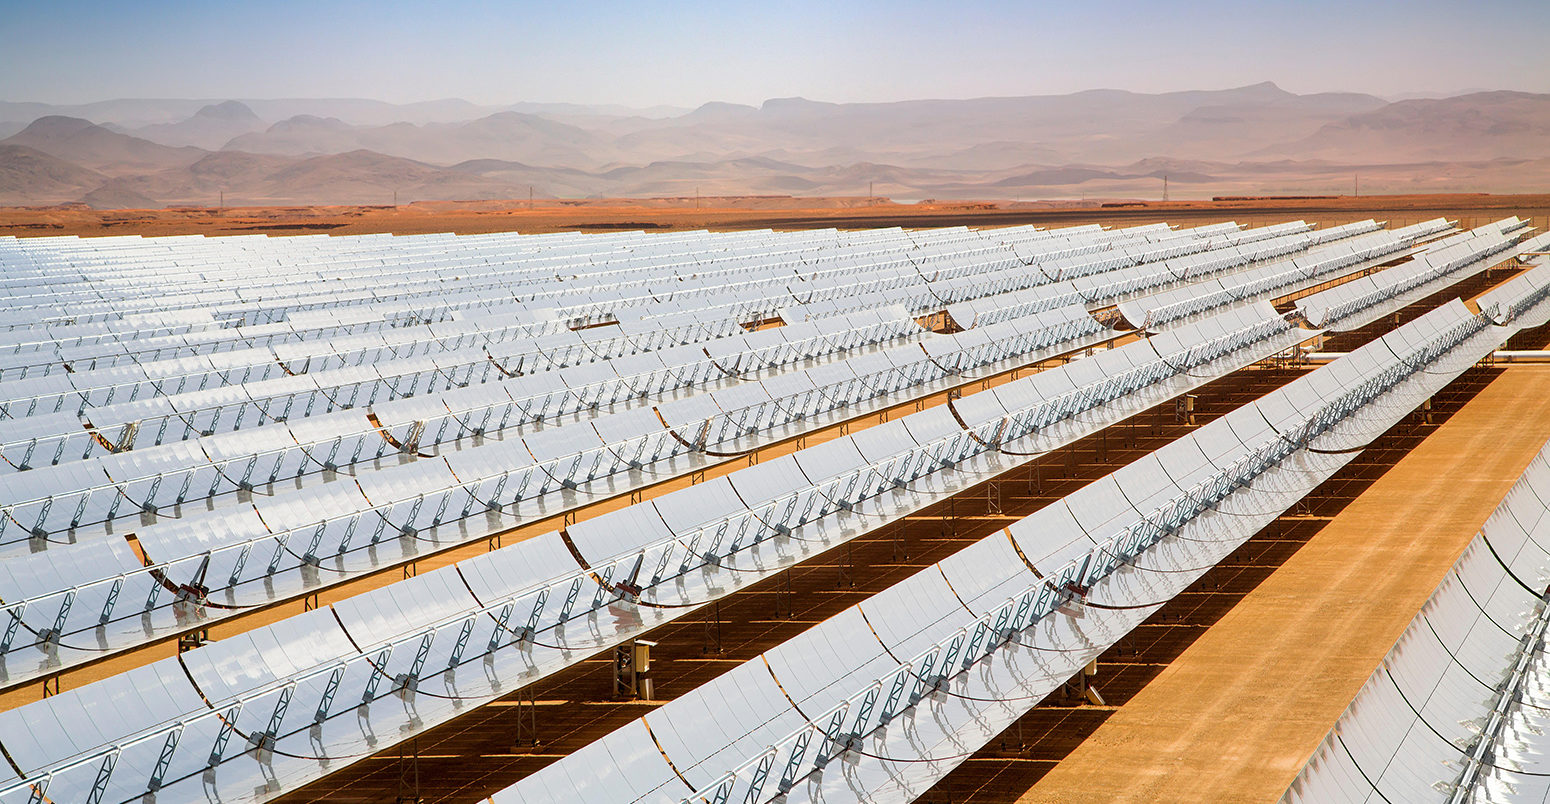 JT0C8A Solar thermal sustainable energy, Noor Ouarzazate Concentrated Solar Power Station Complex. Morocco, Maghreb North Africa.